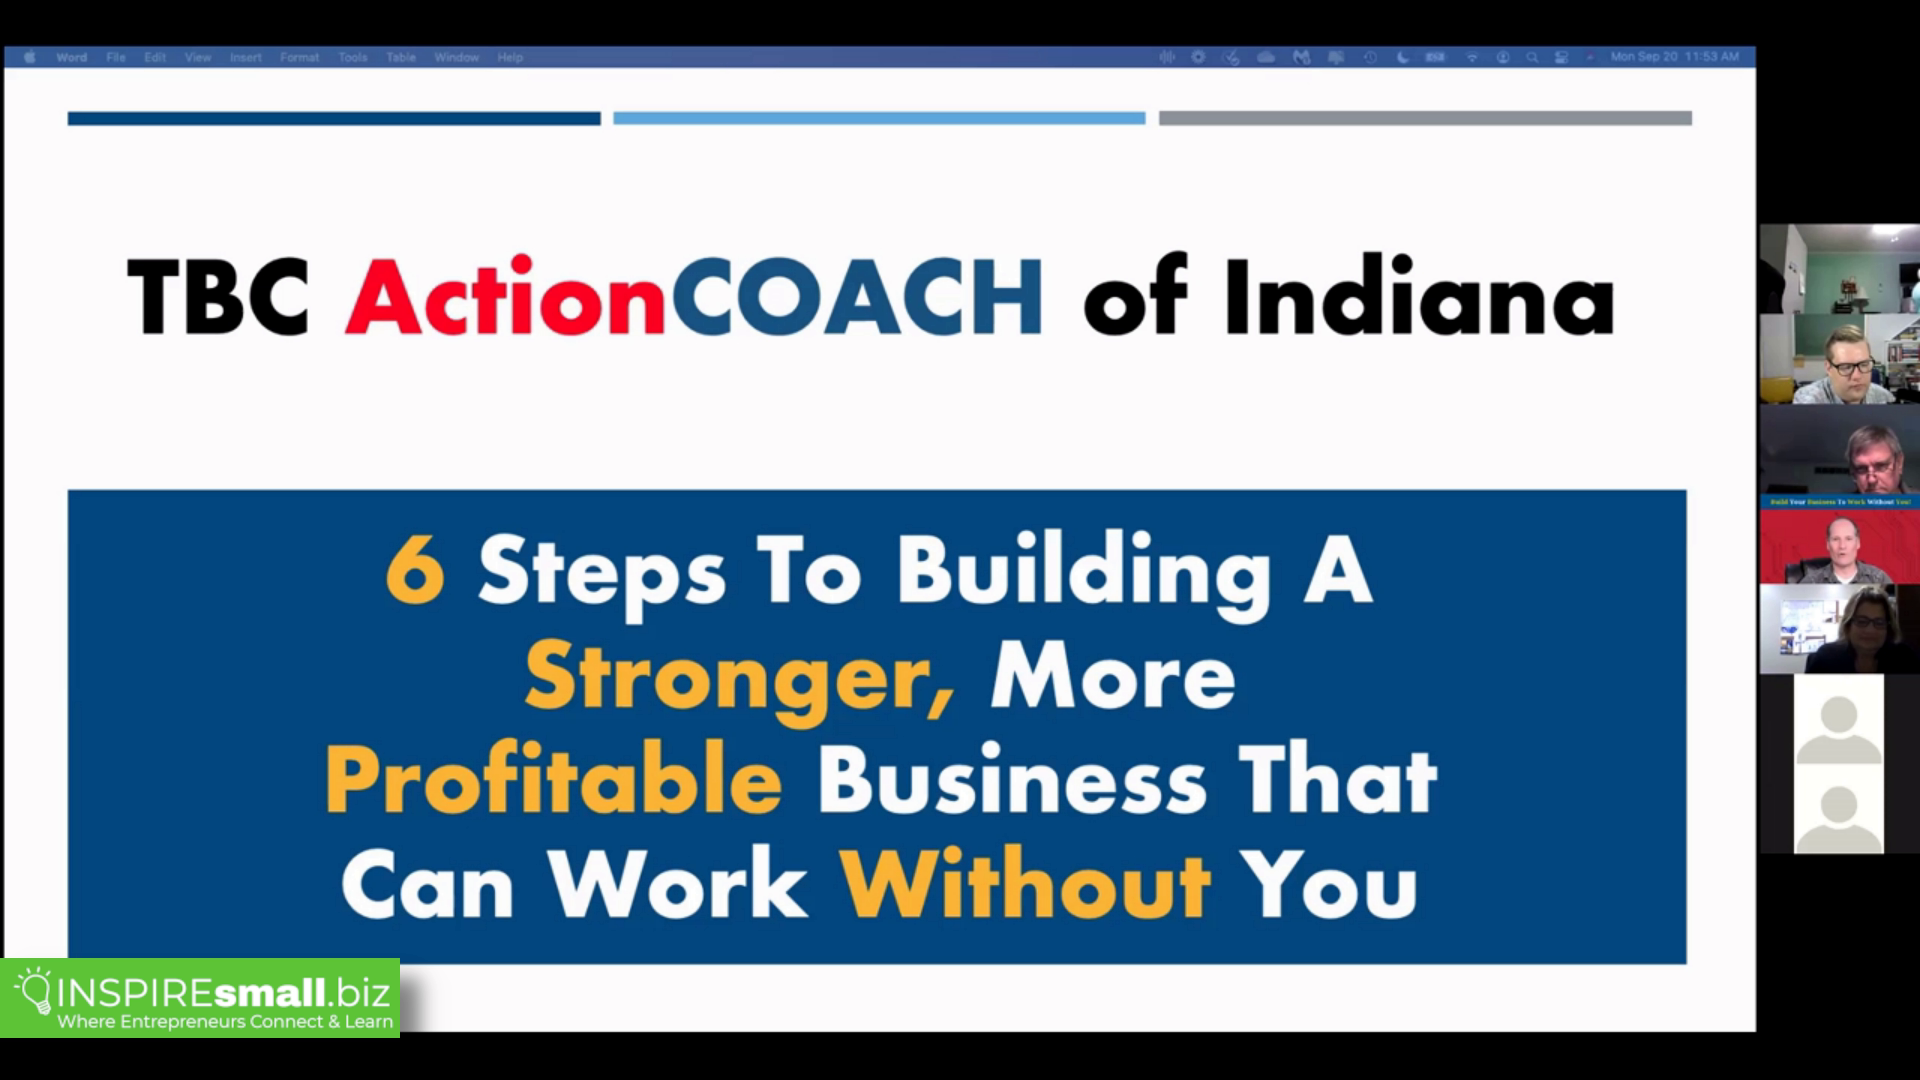 Screenshot of Tim Campsall, owner of TBC ActionCOACH of Indiana's presentation 6 Steps to Building AStronger, More Profitable Business That Can Run Without You